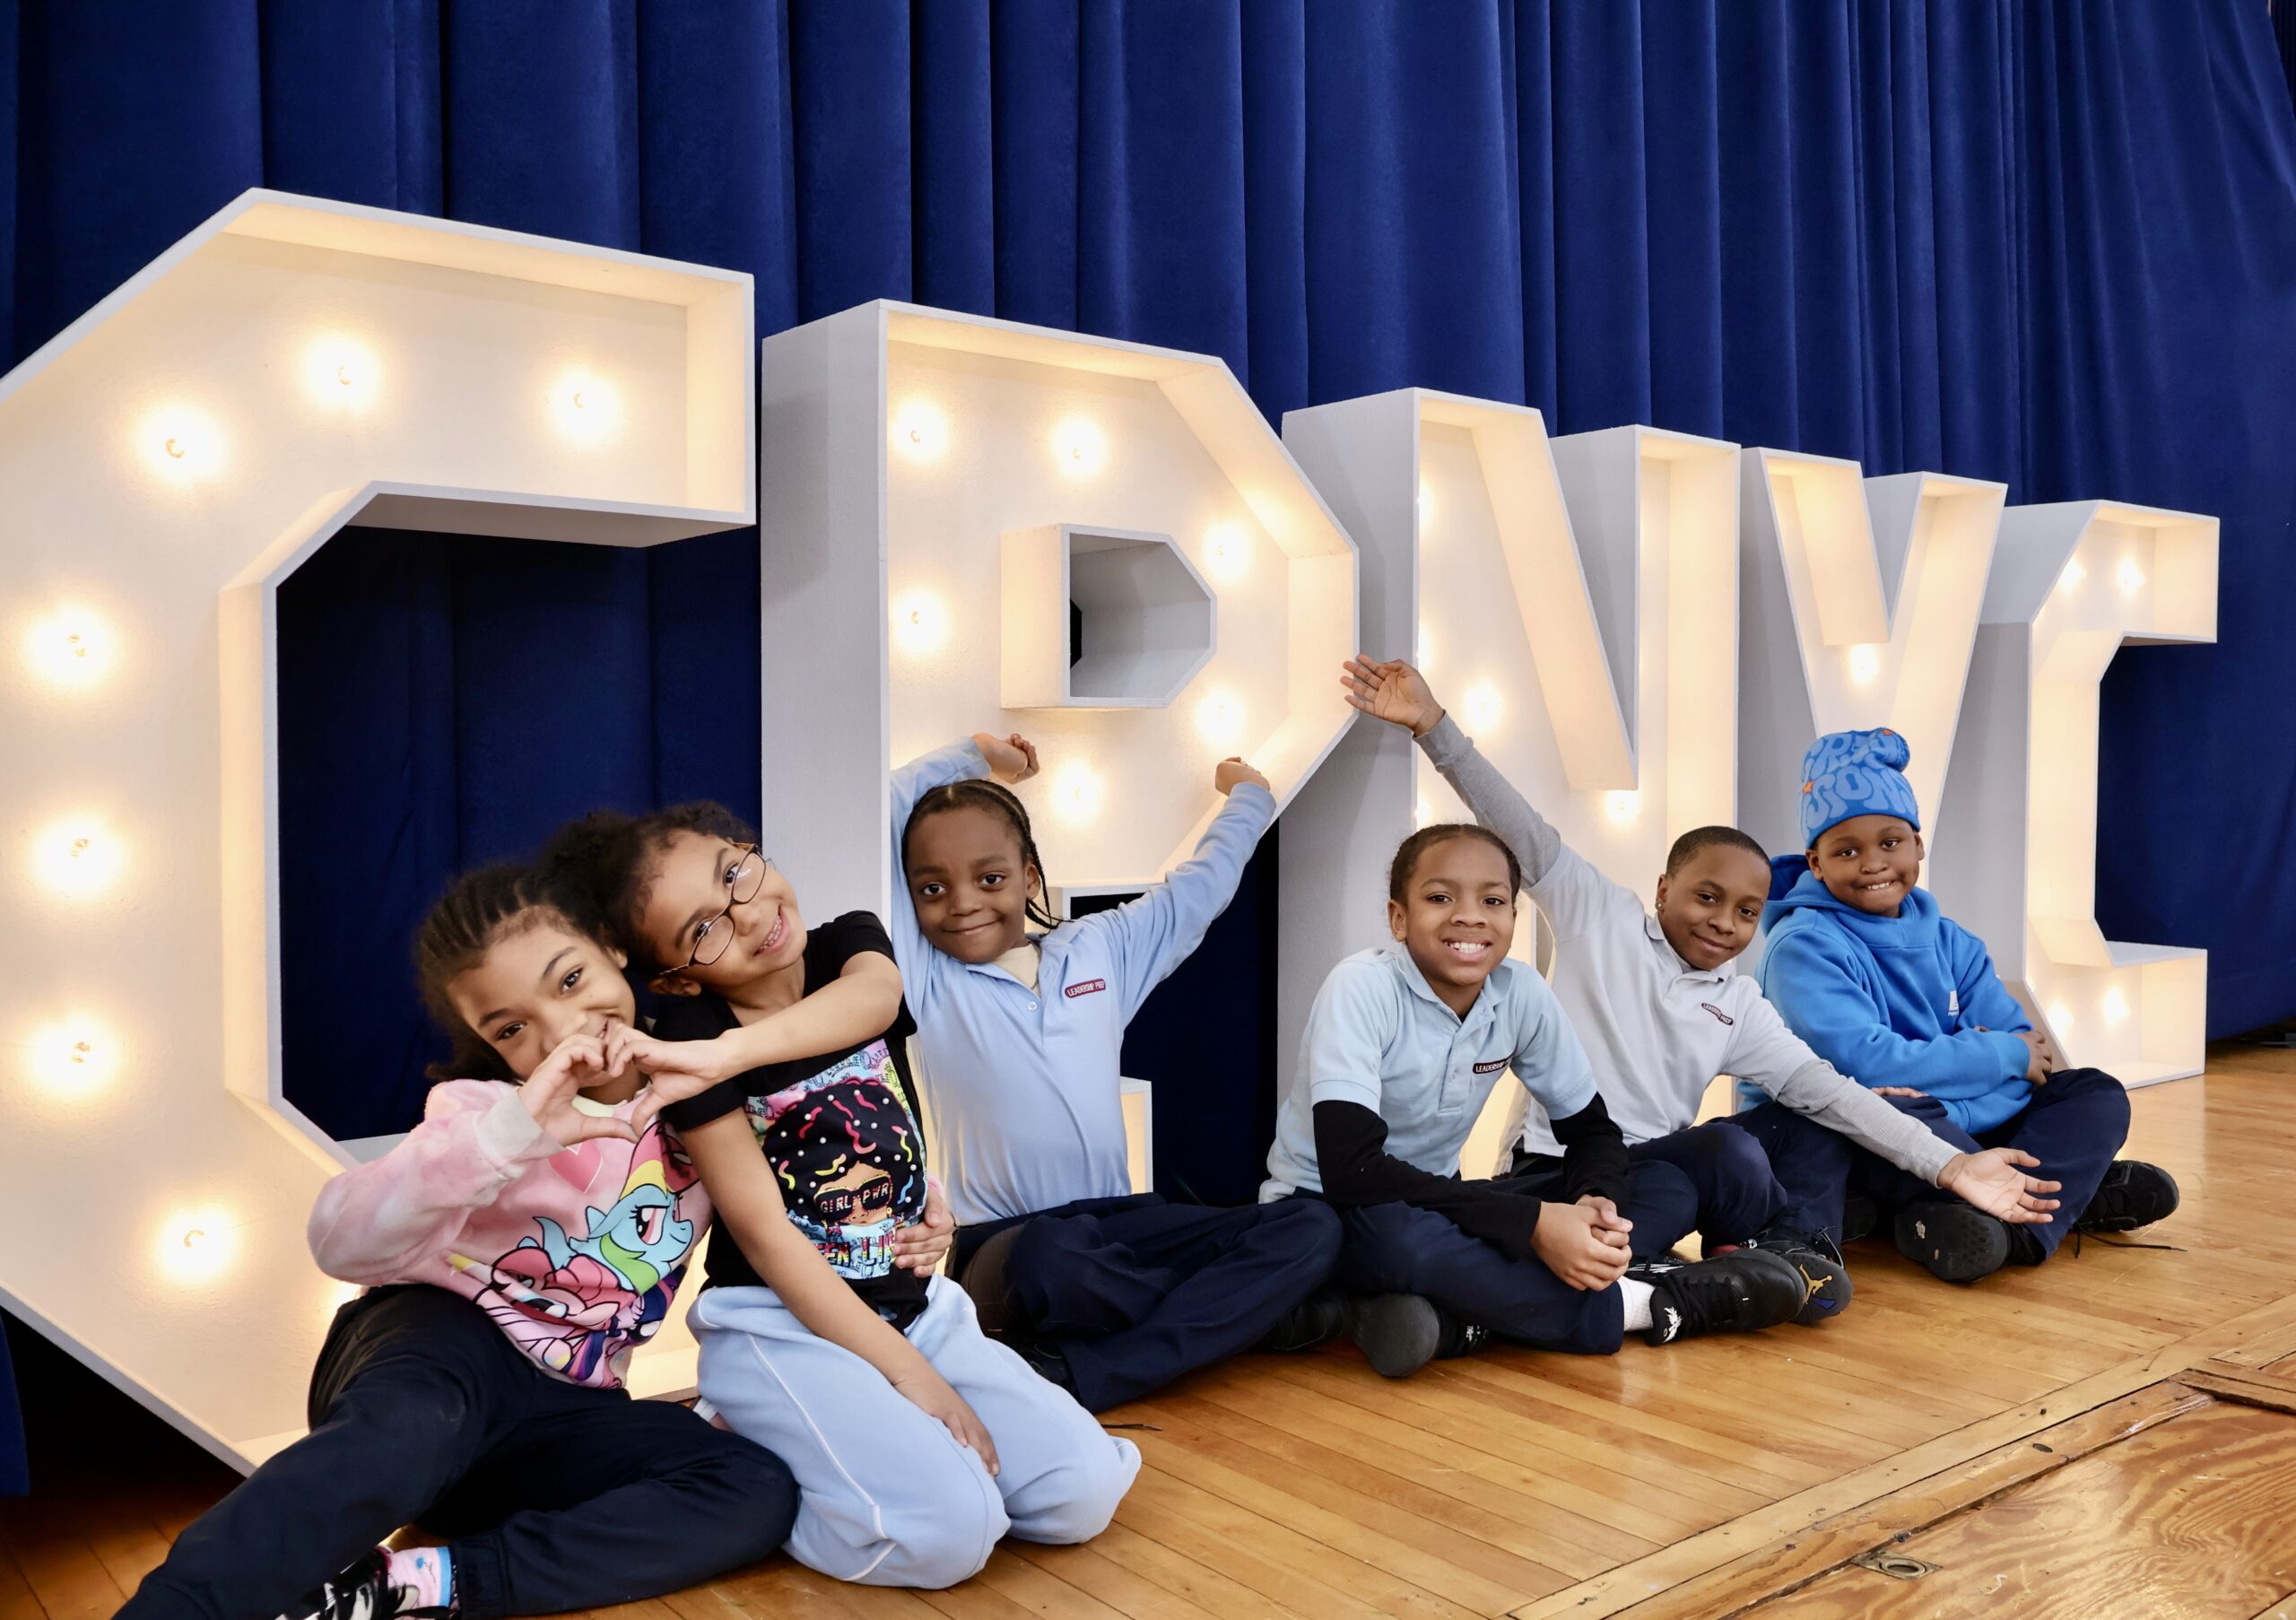 Children gather in front of the Children of Promise, NYC sign, showcasing the organization dedicated to supporting those affected by parental incarceration, now bolstered by a $2 million grant from MacKenzie Scott’s Yield Giving.Photo courtesy of CPNYC